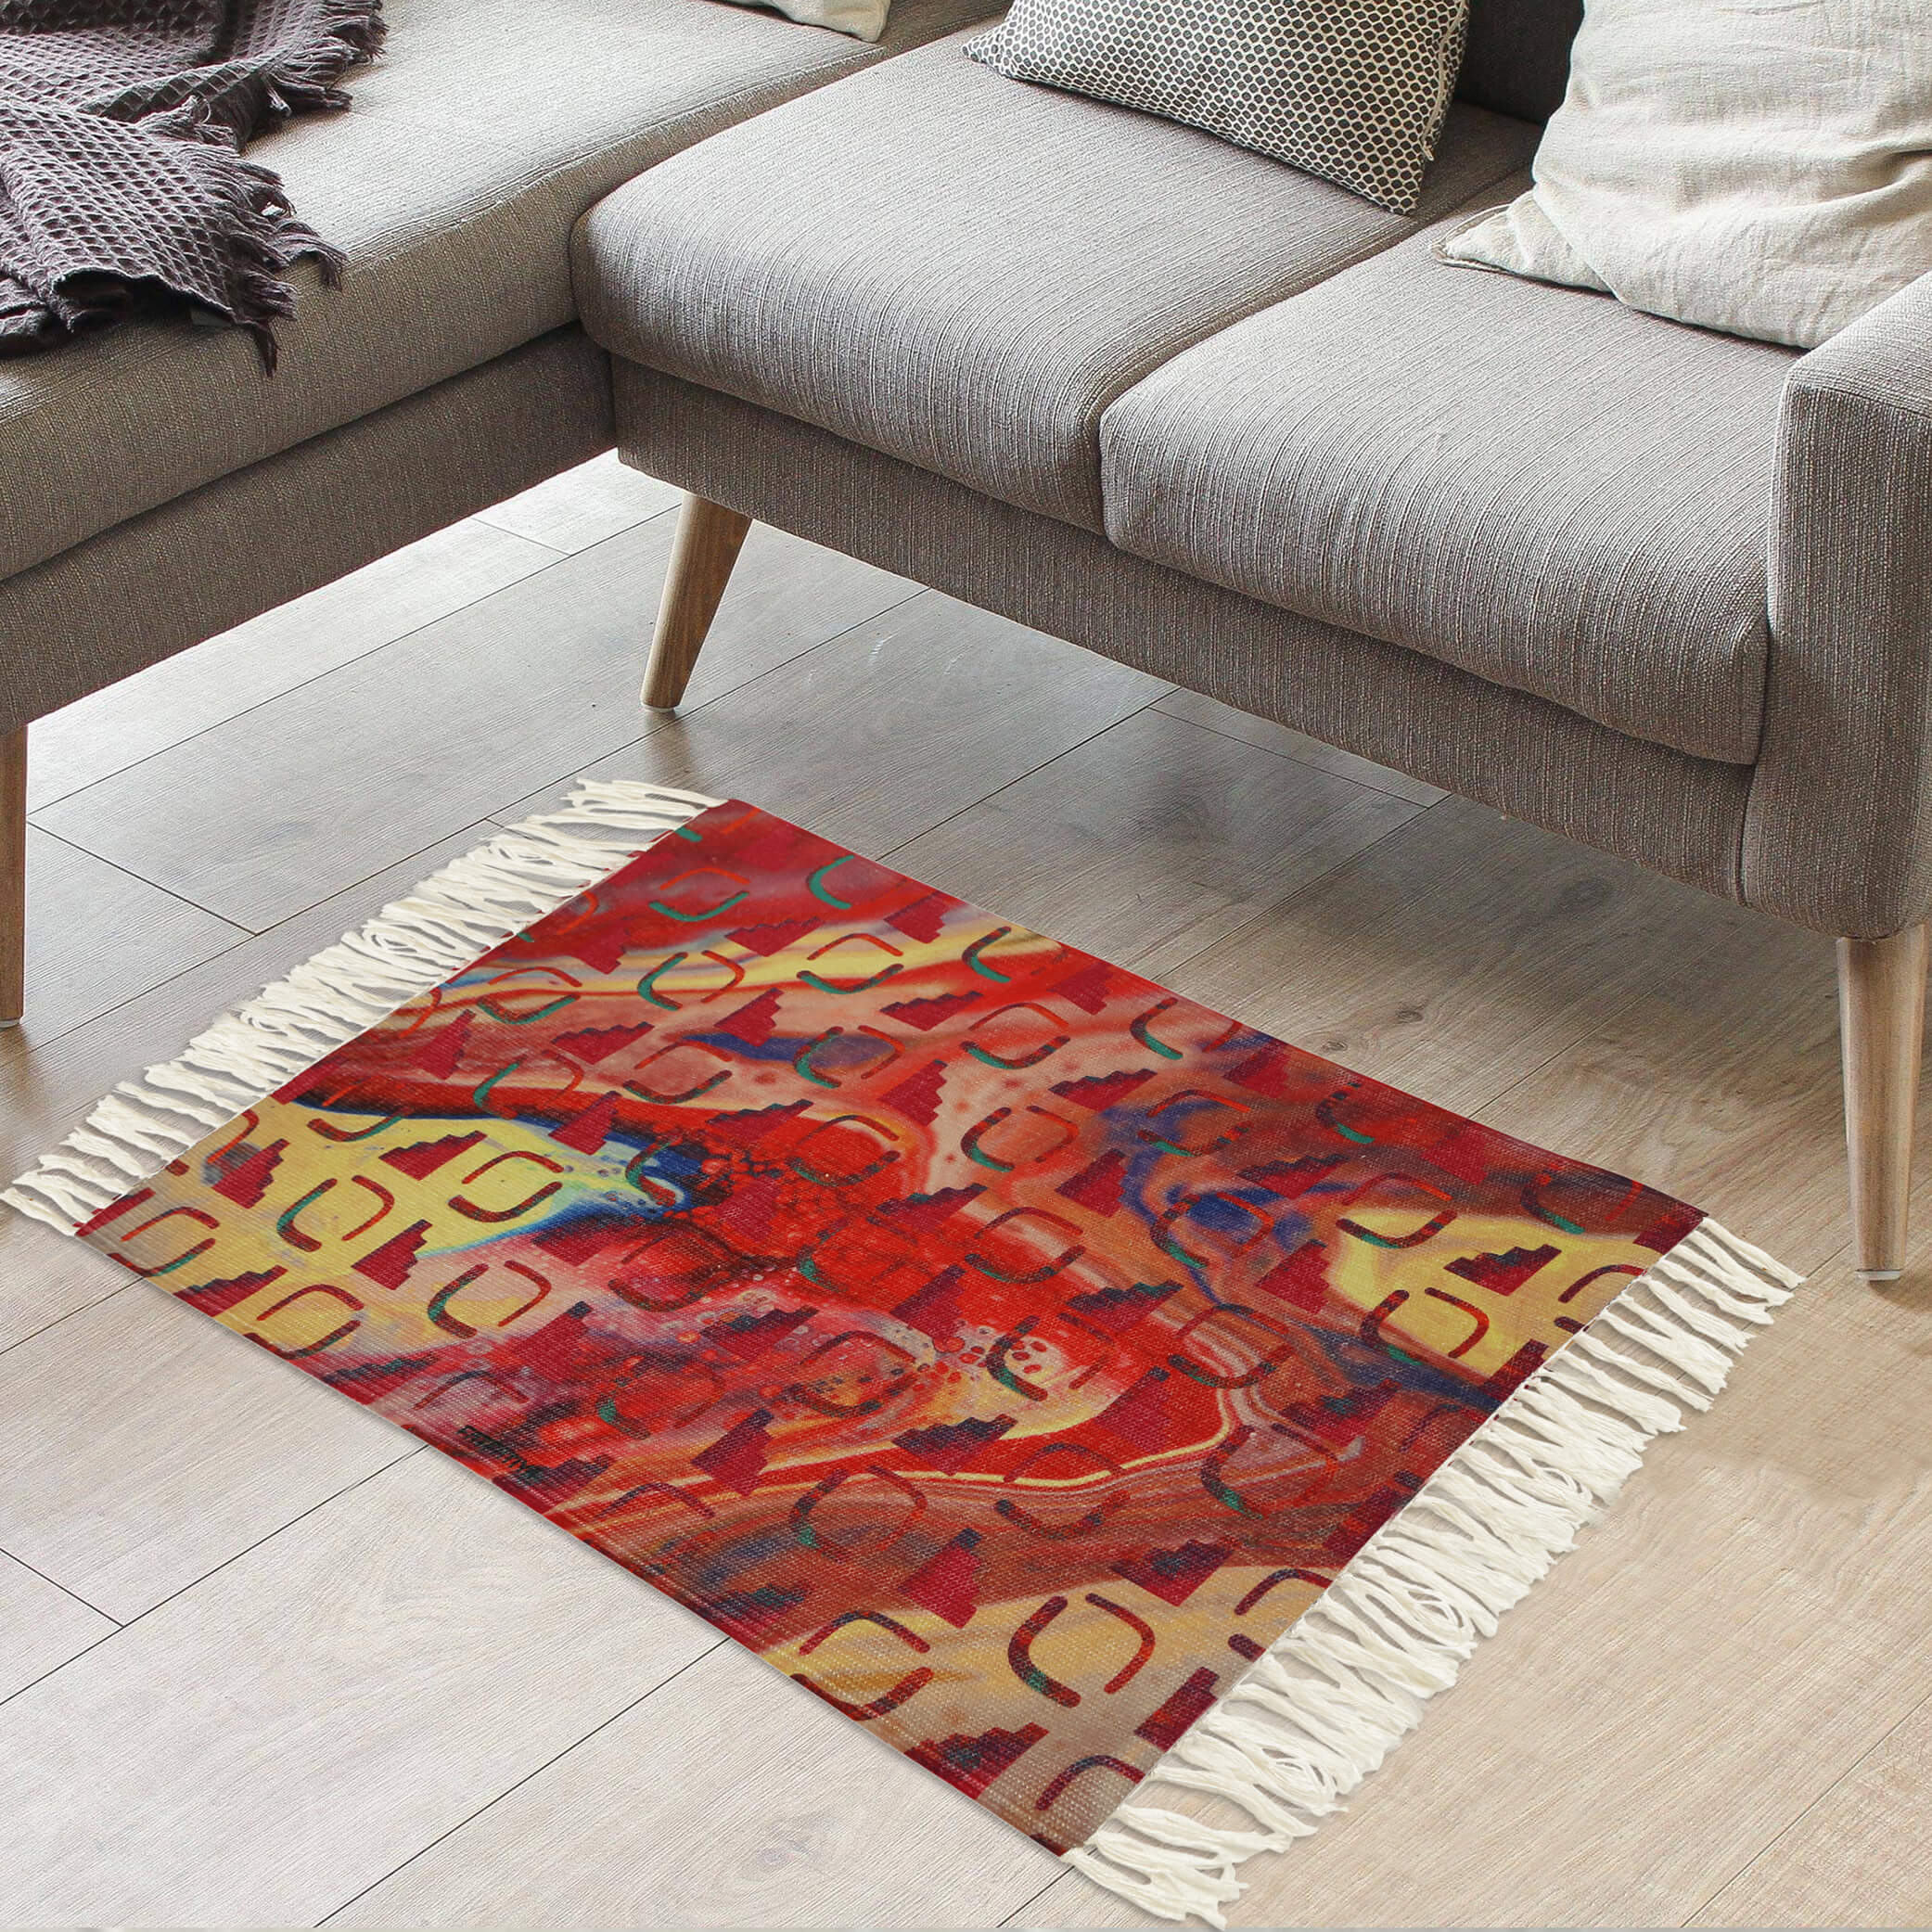 Shop Handmade Rugs and Carpet Online